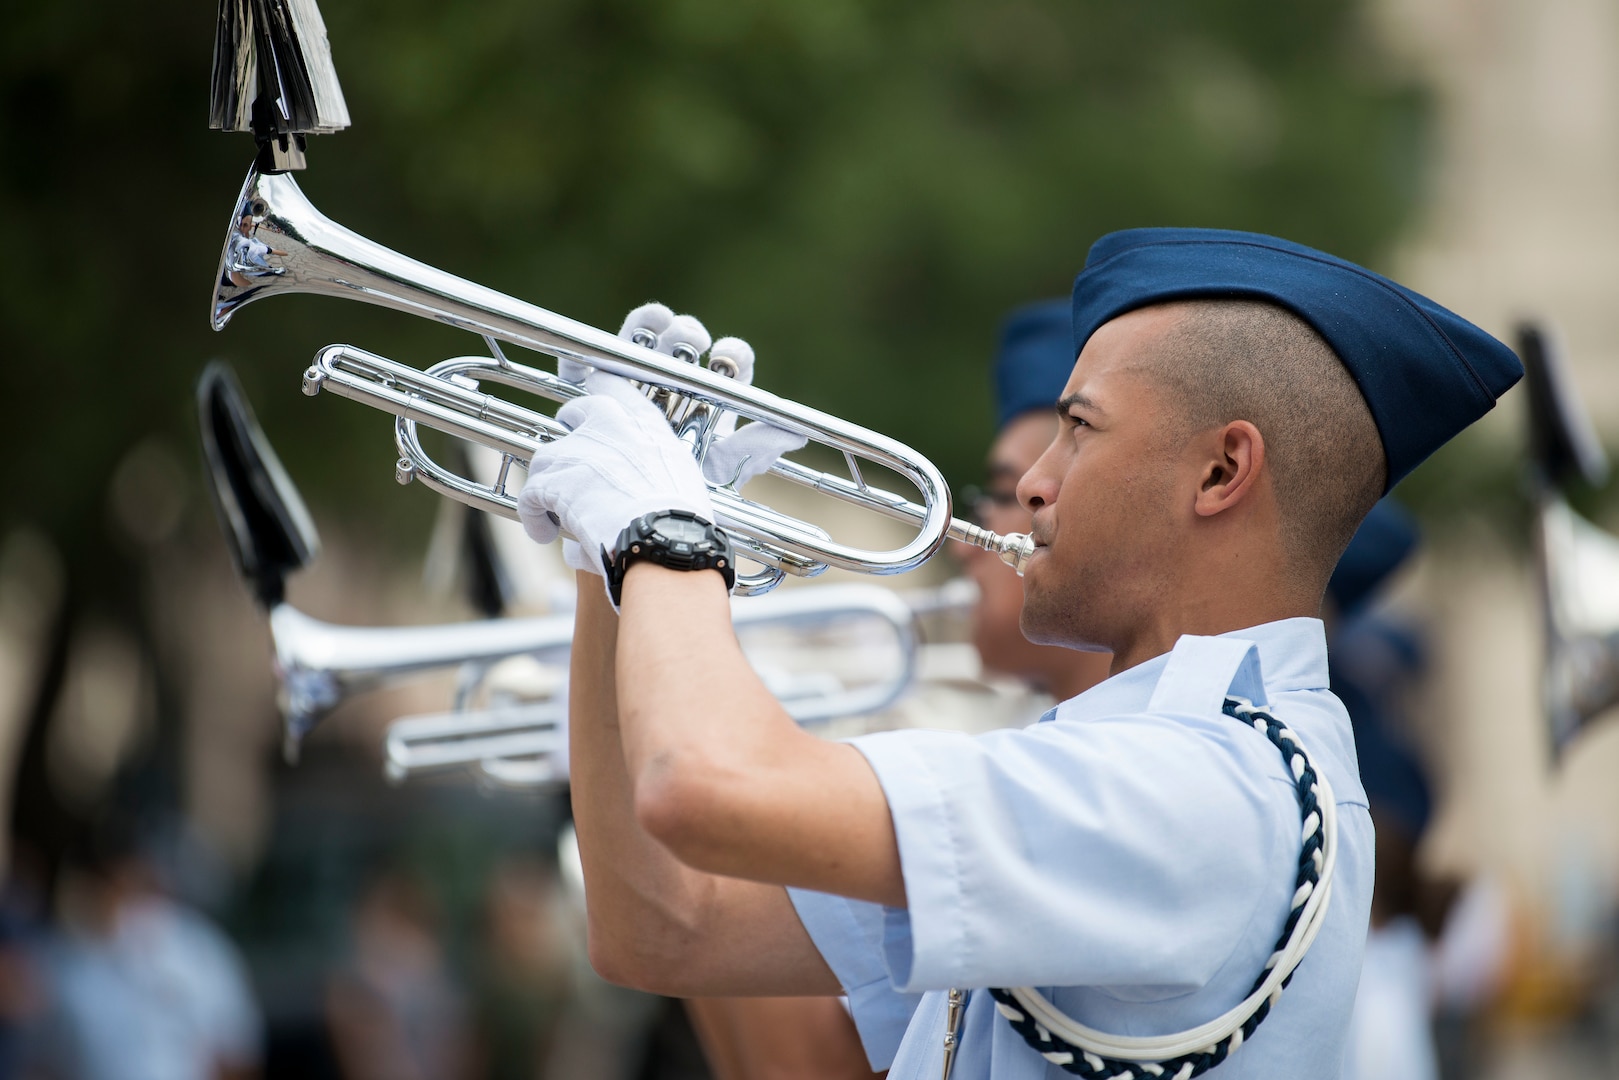 An Air Force basic military trainee, 321st Training Squadron, Joint Base San Antonio-Lackland Drum and Bugle Corps, performs during San Antonio’s Fiesta Air Force Day at the Alamo, April 22, 2019. From its beginning in 1891, Fiesta has grown into an annual celebration that includes civic and military observances, street and river parades, exhibits, pilgrimages and memorials.